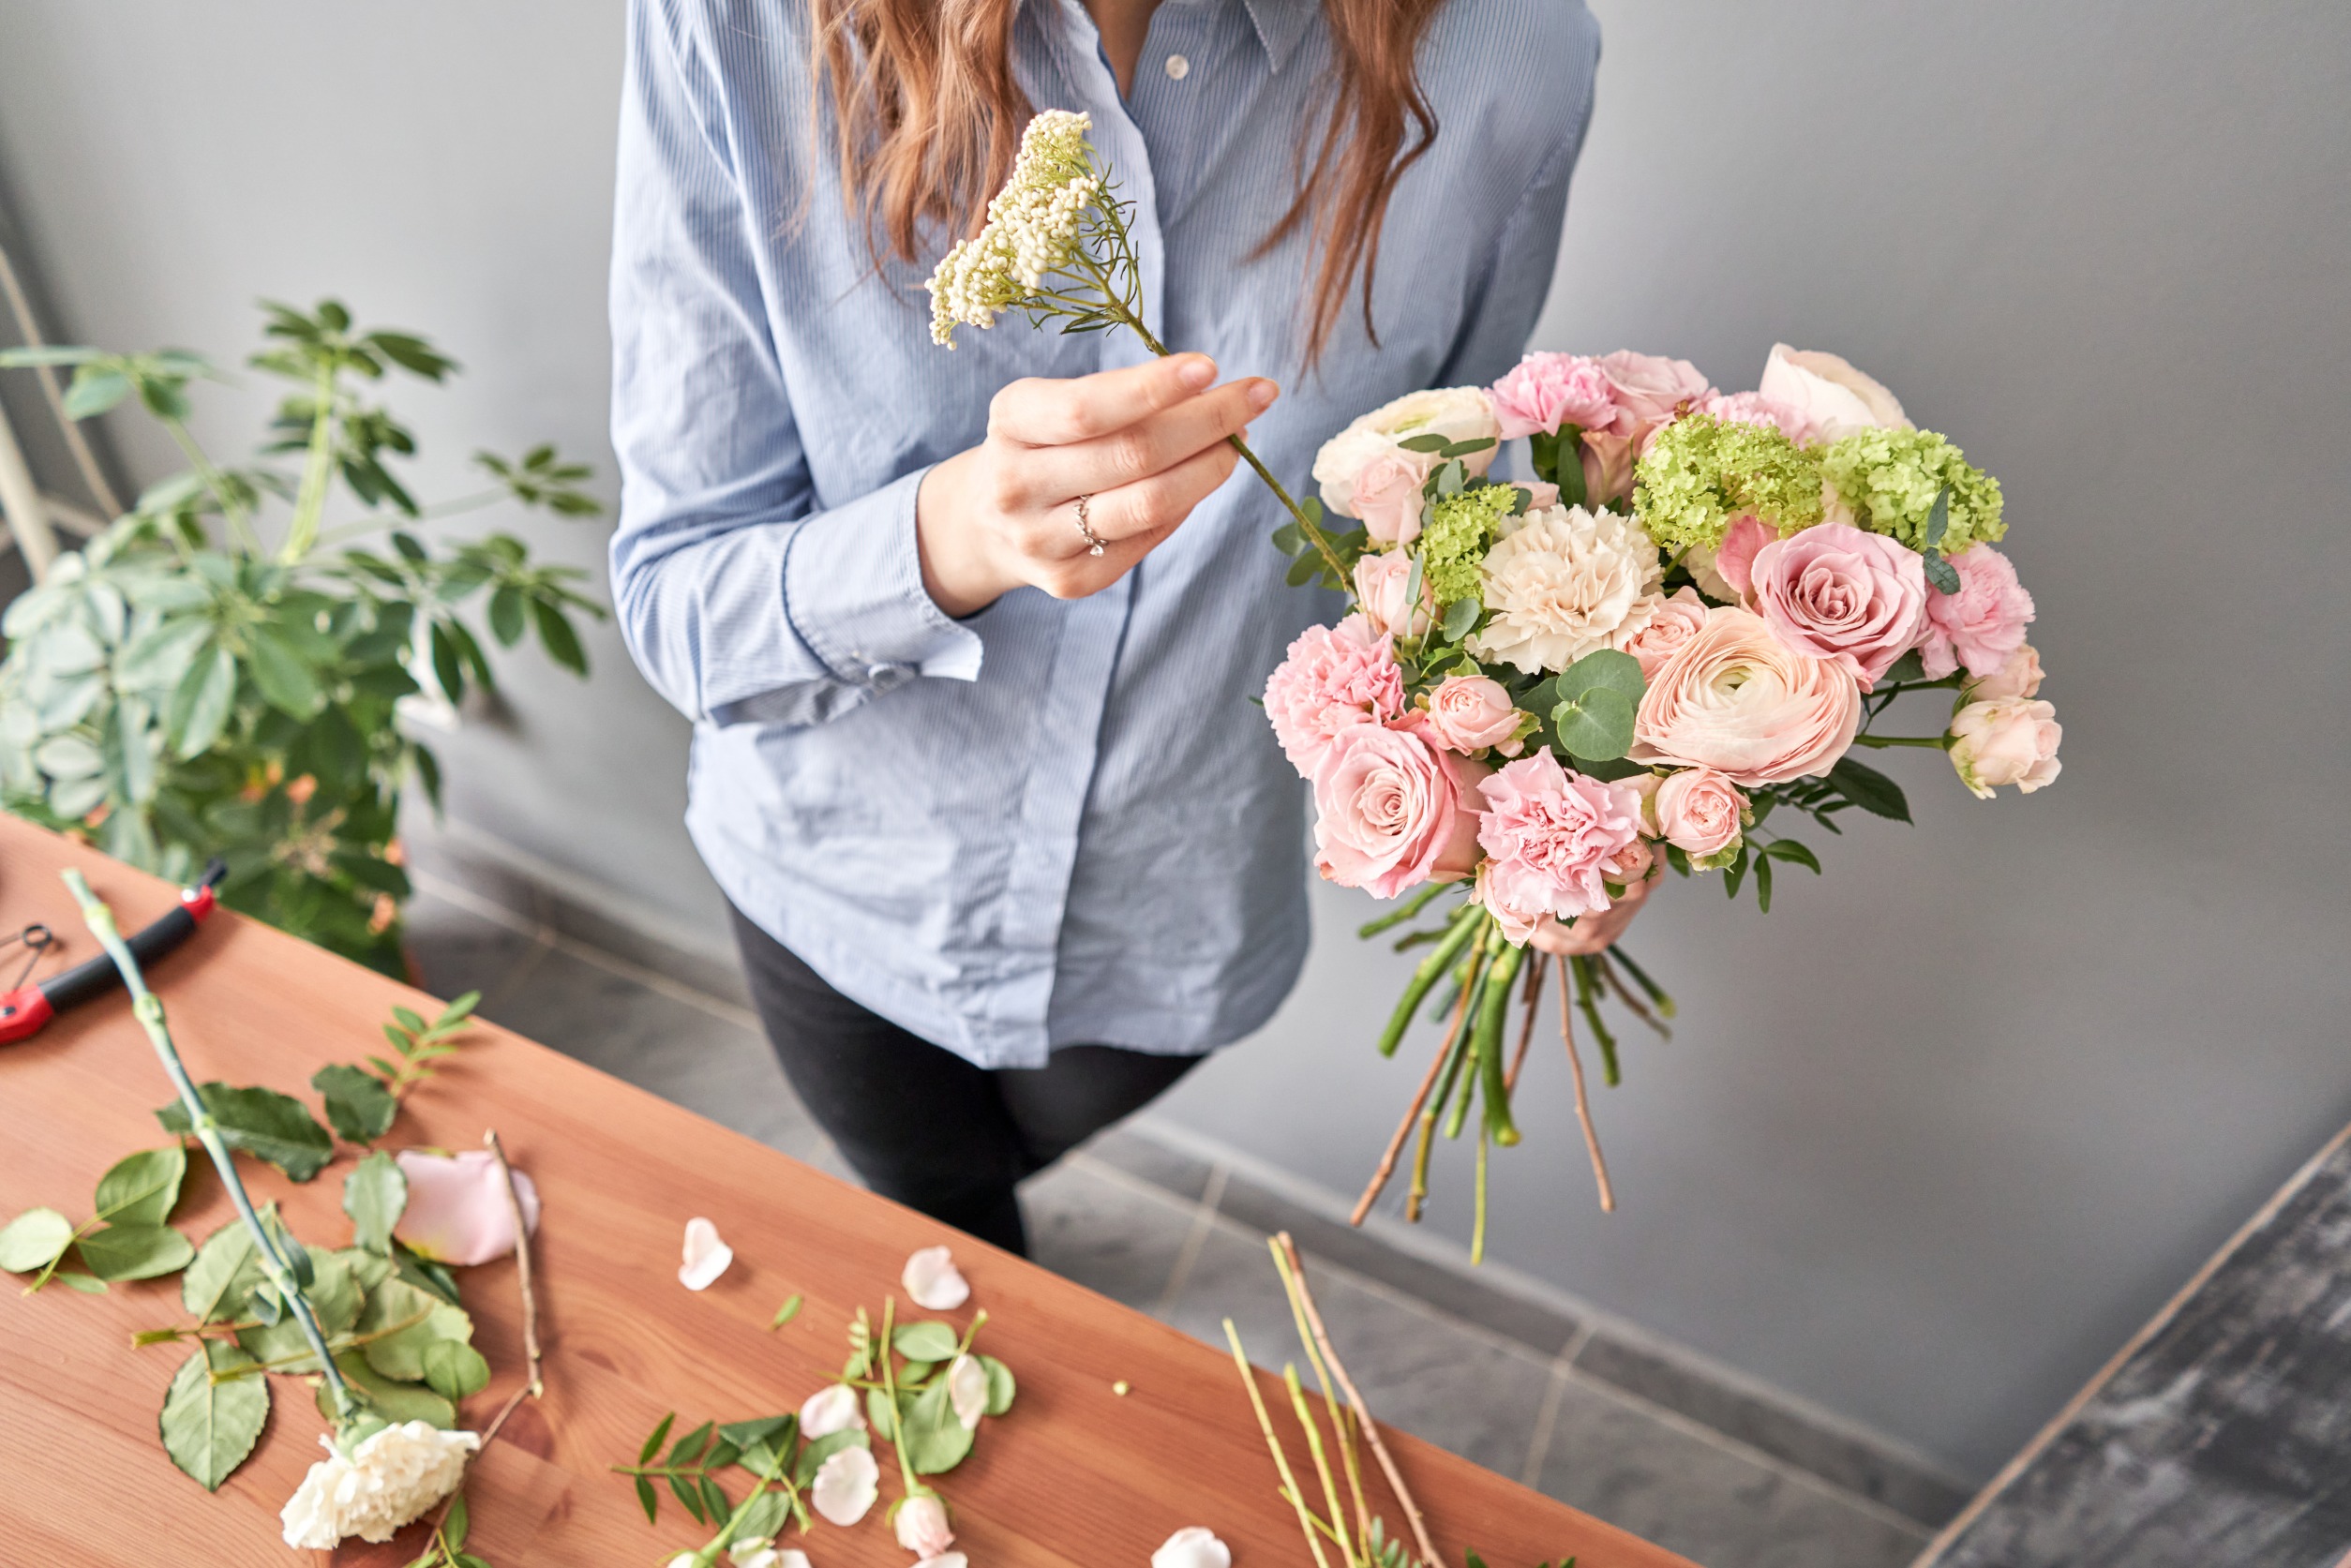 Placing small flowers in floral arrangement